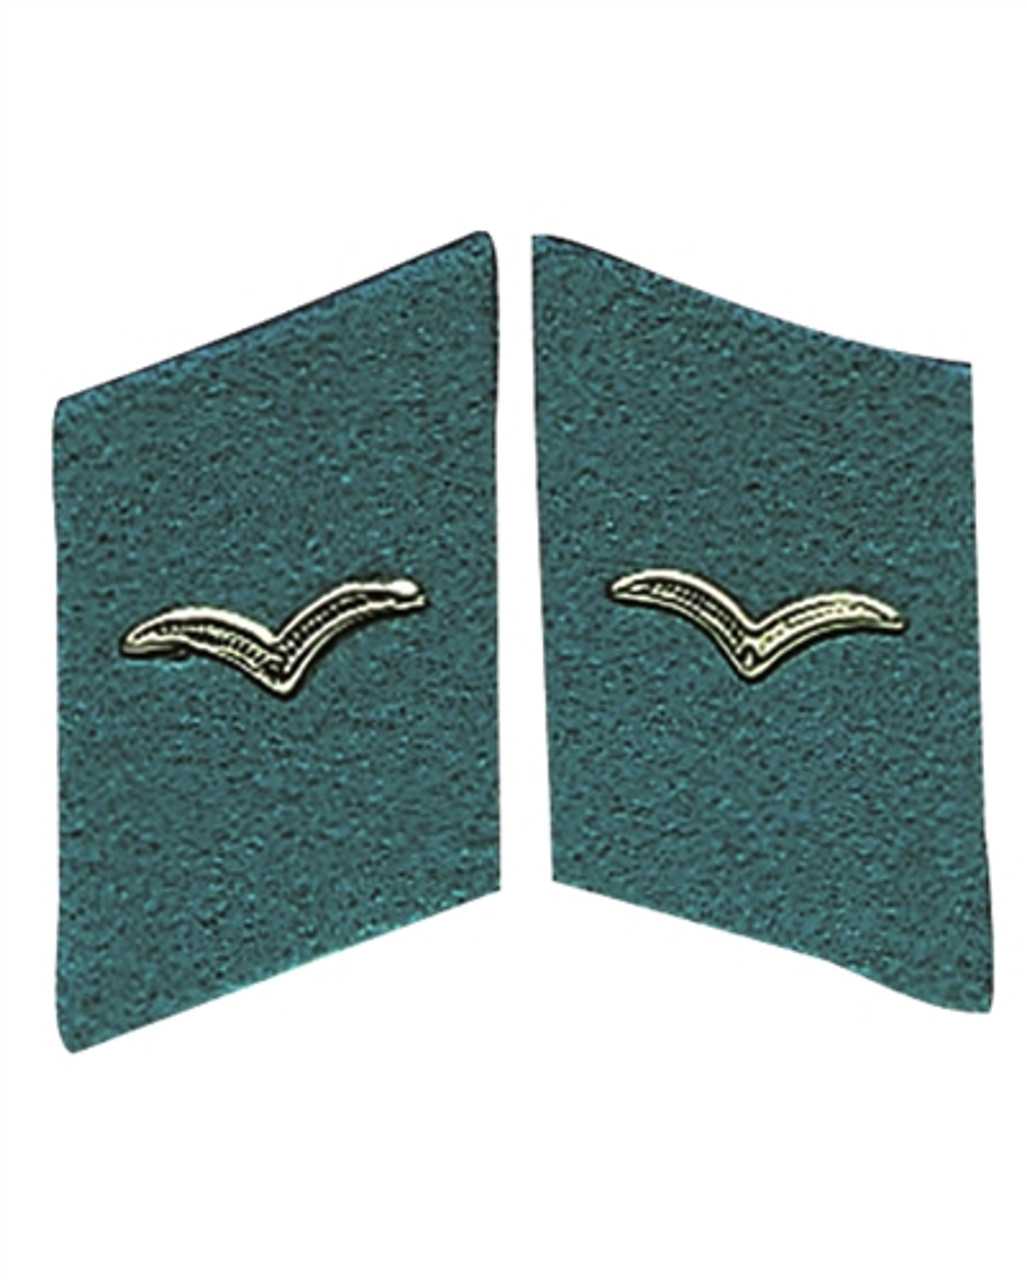 NVA Enlisted Collar Tabs - Air Force from Hessen Surplus